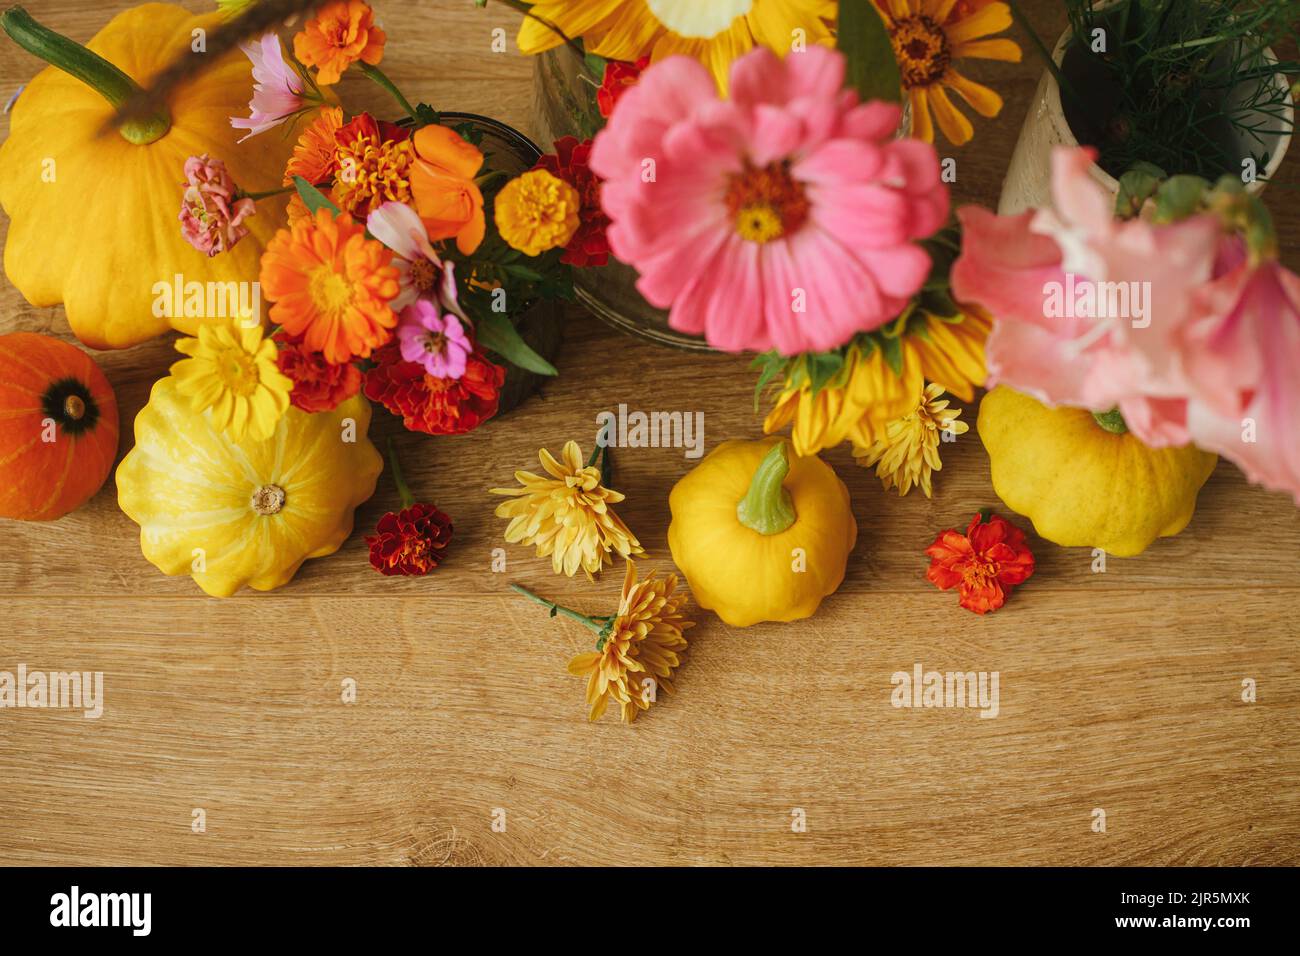 Stylish autumn composition. Colorful autumn flowers, pumpkins, pattypan squashes on rustic wood, top view. Seasons greeting card, space for text. Harv Stock Photo